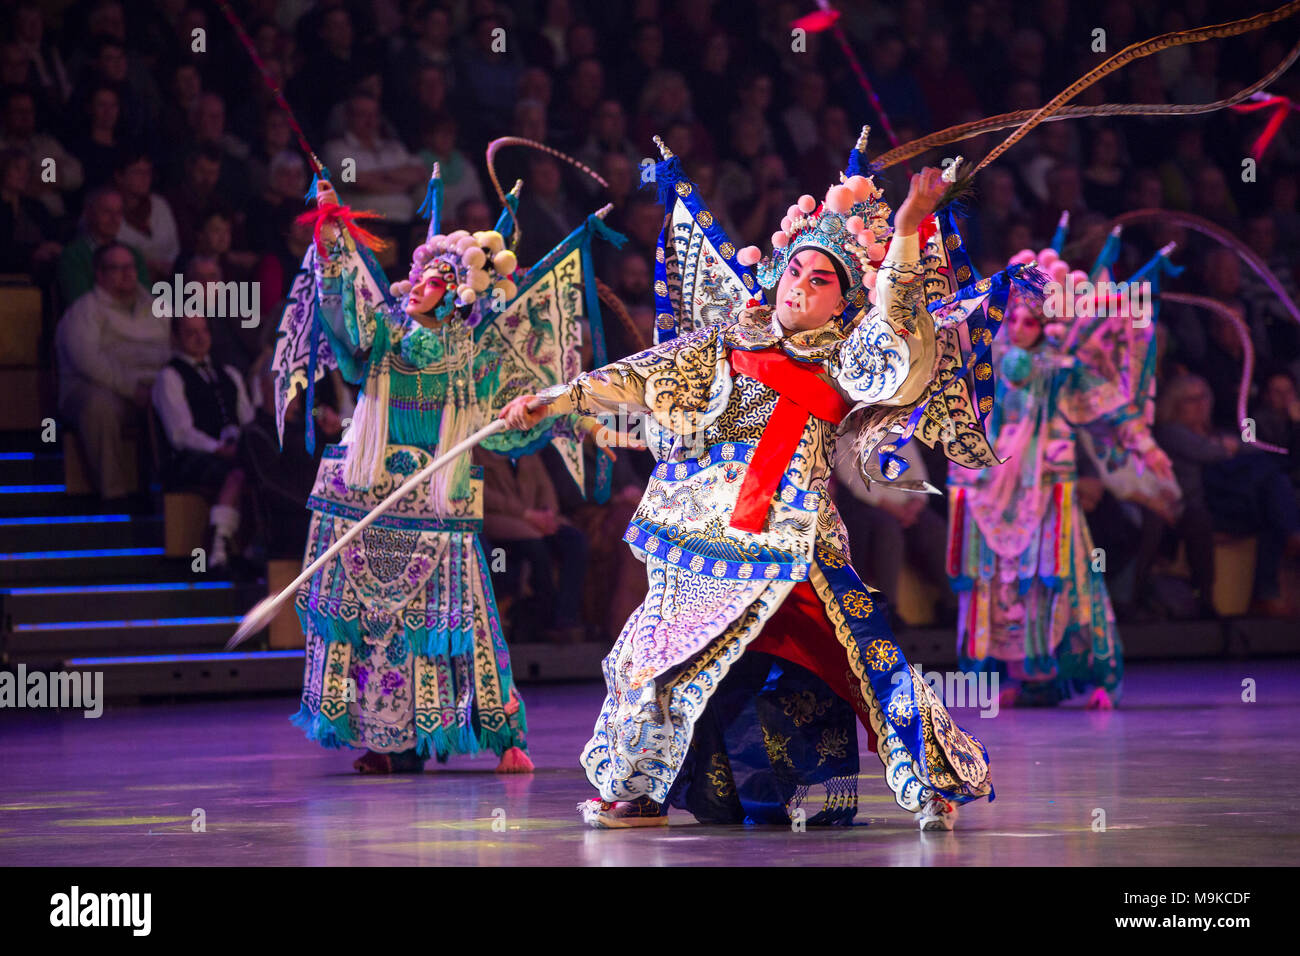 Wetzlar, Germany. 2nd Mar, 2018. Wind Orchestra of Shijiazhuang, China, with Beijing Opera performers at Musikparade 2018, Marching Band Show at Rittal-Arena Wetzlar. Credit: Christian Lademann Stock Photo